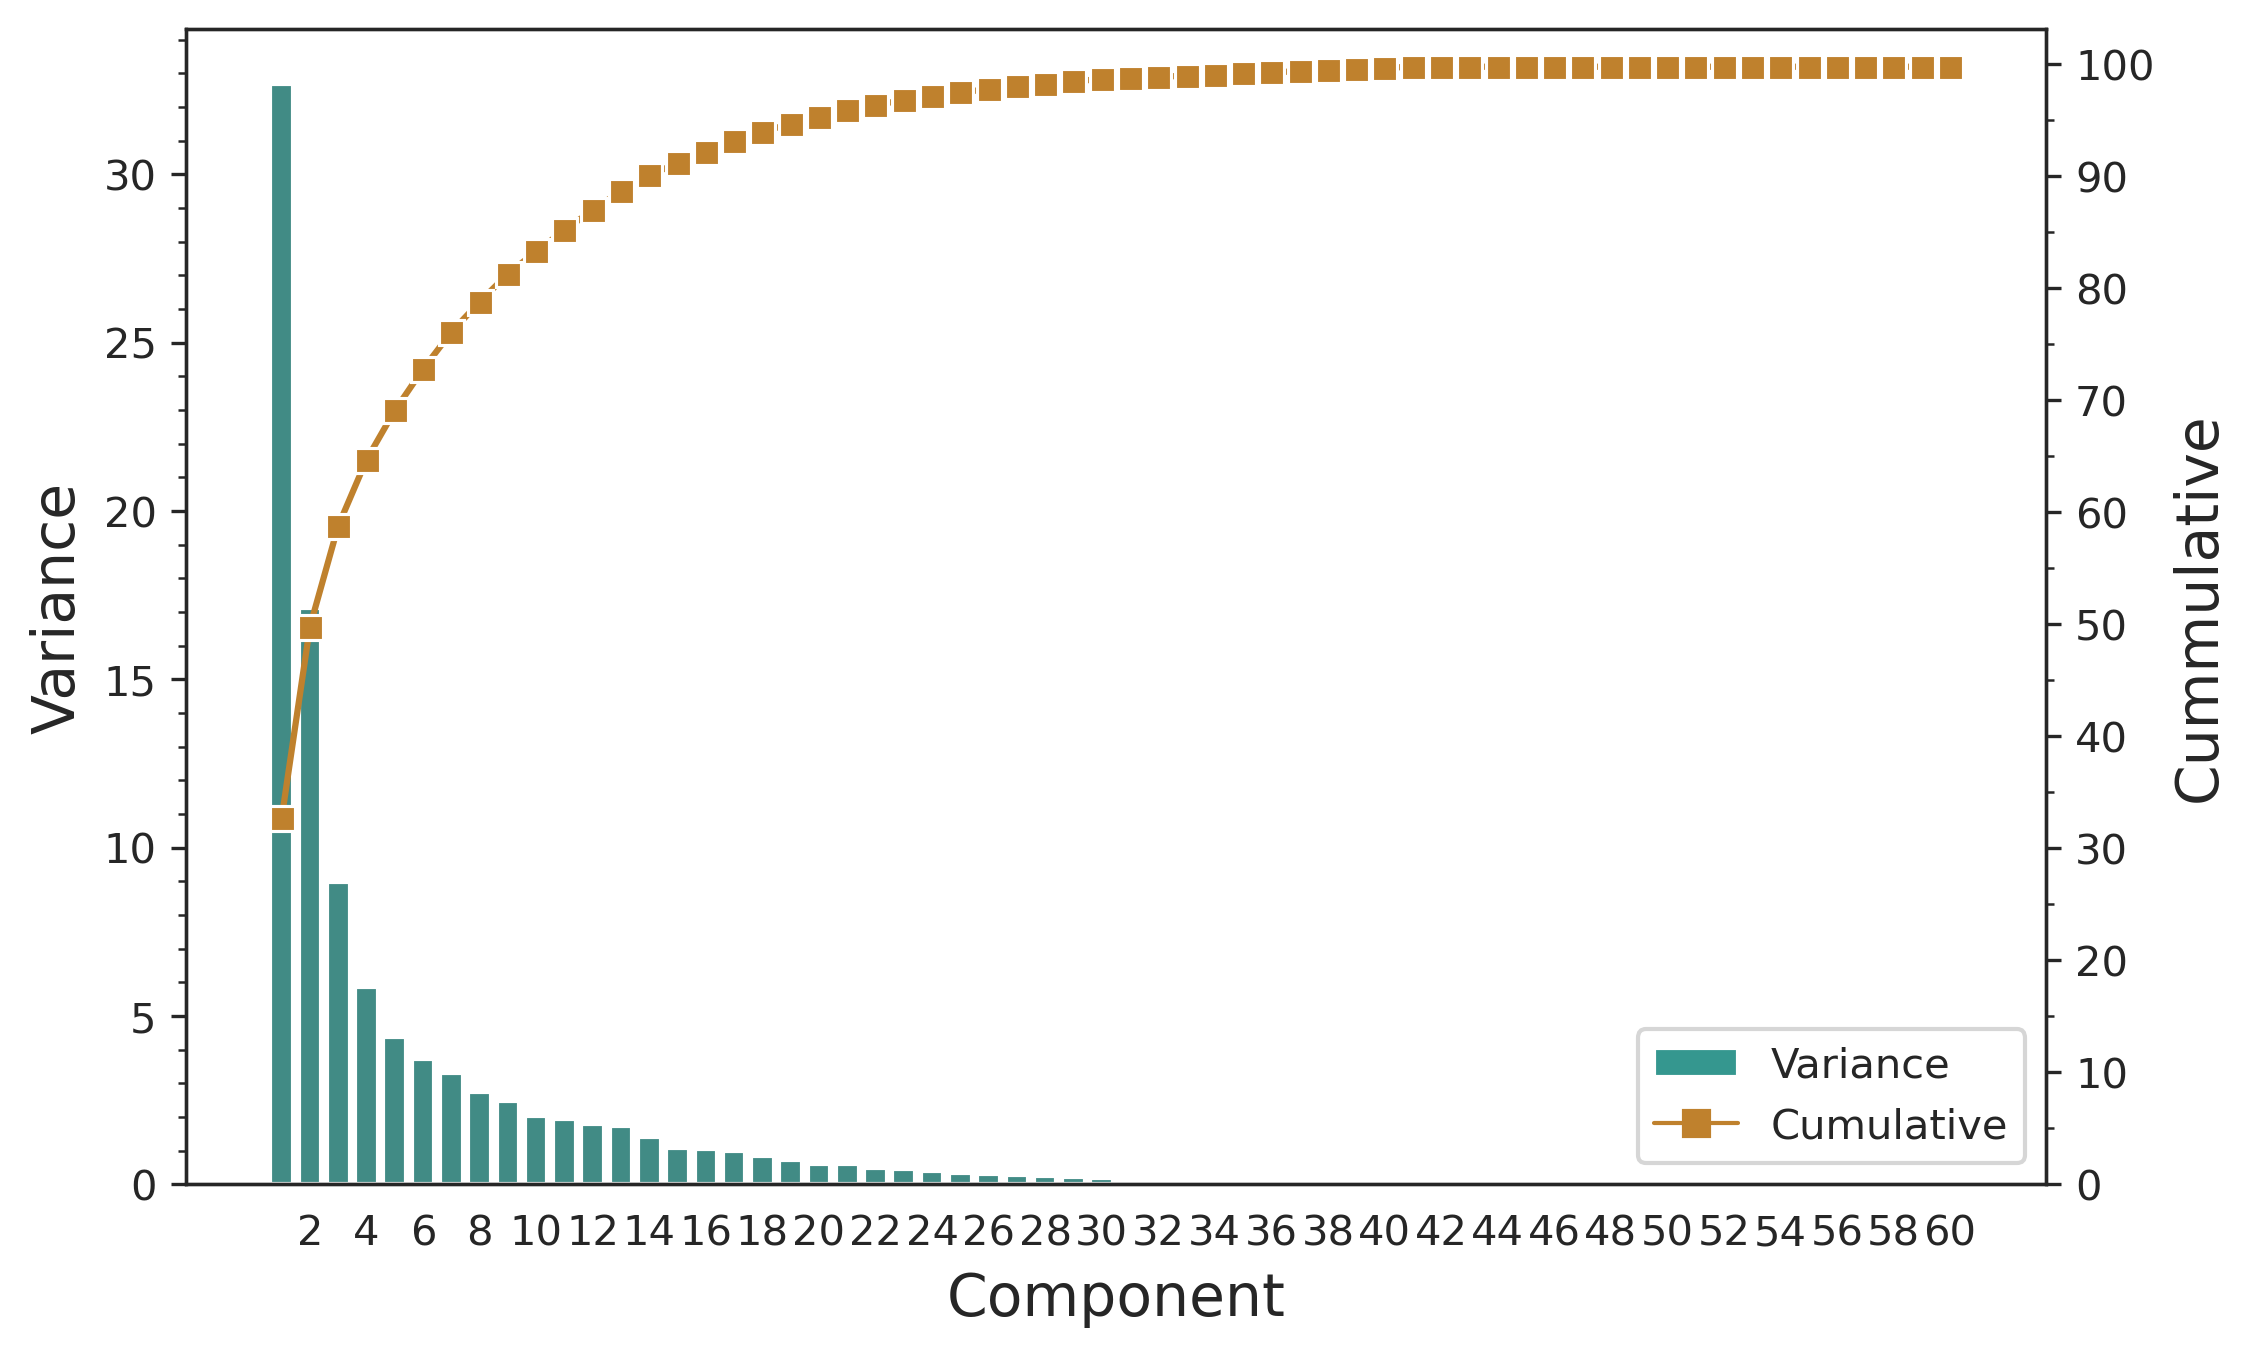 The Pareto histogram for the 60 components of the Principal Component Analysis.